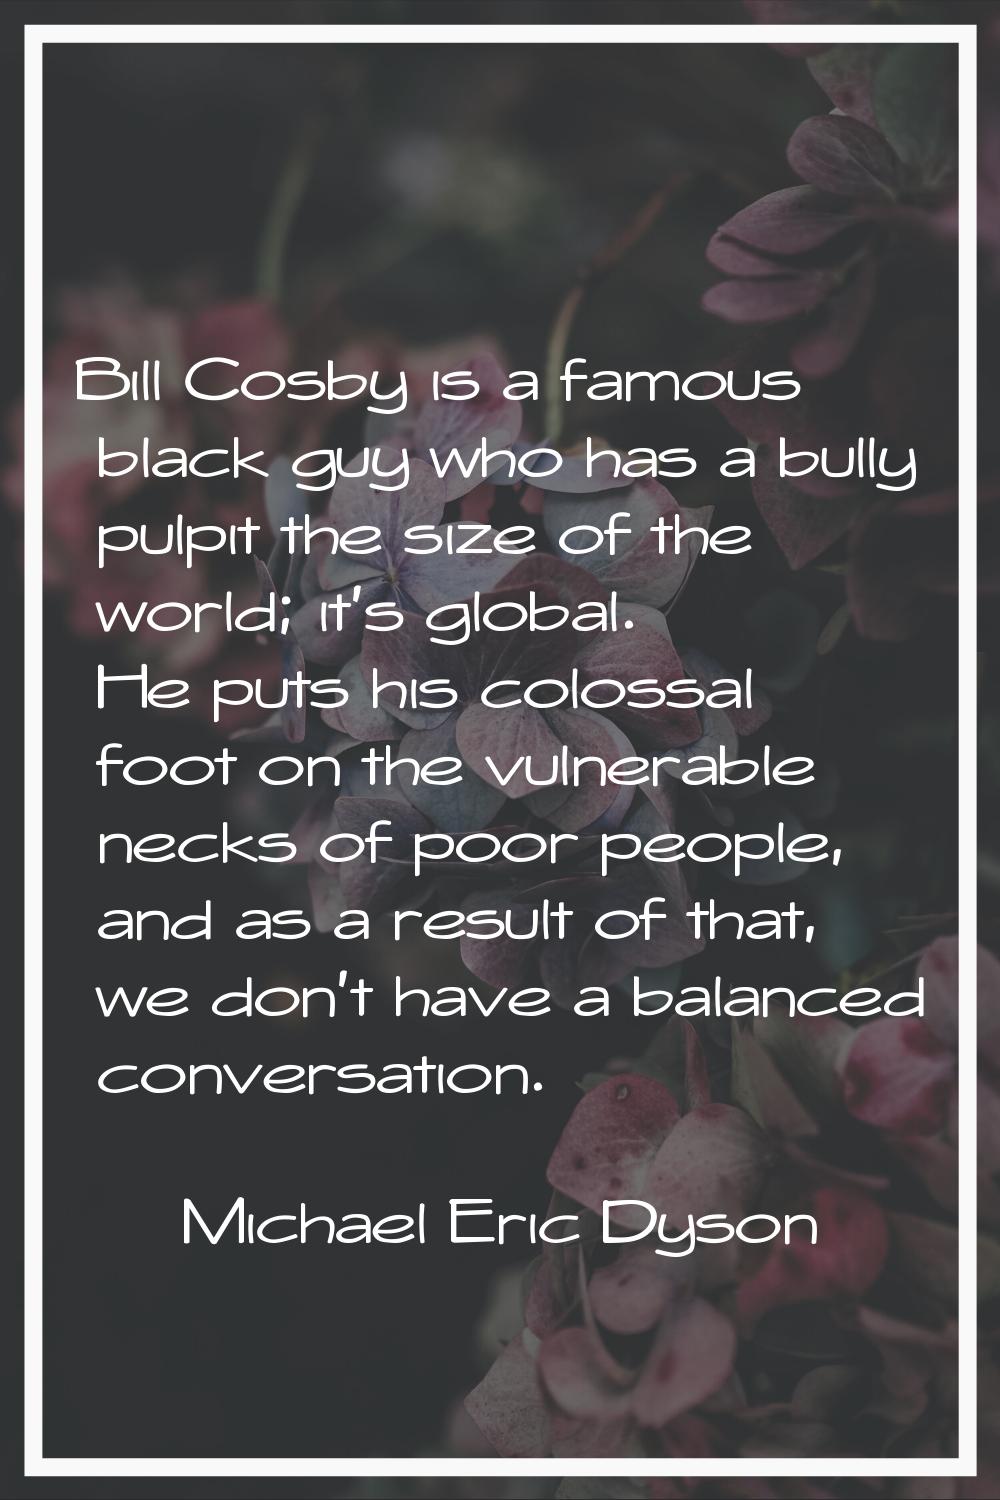 Bill Cosby is a famous black guy who has a bully pulpit the size of the world; it's global. He puts